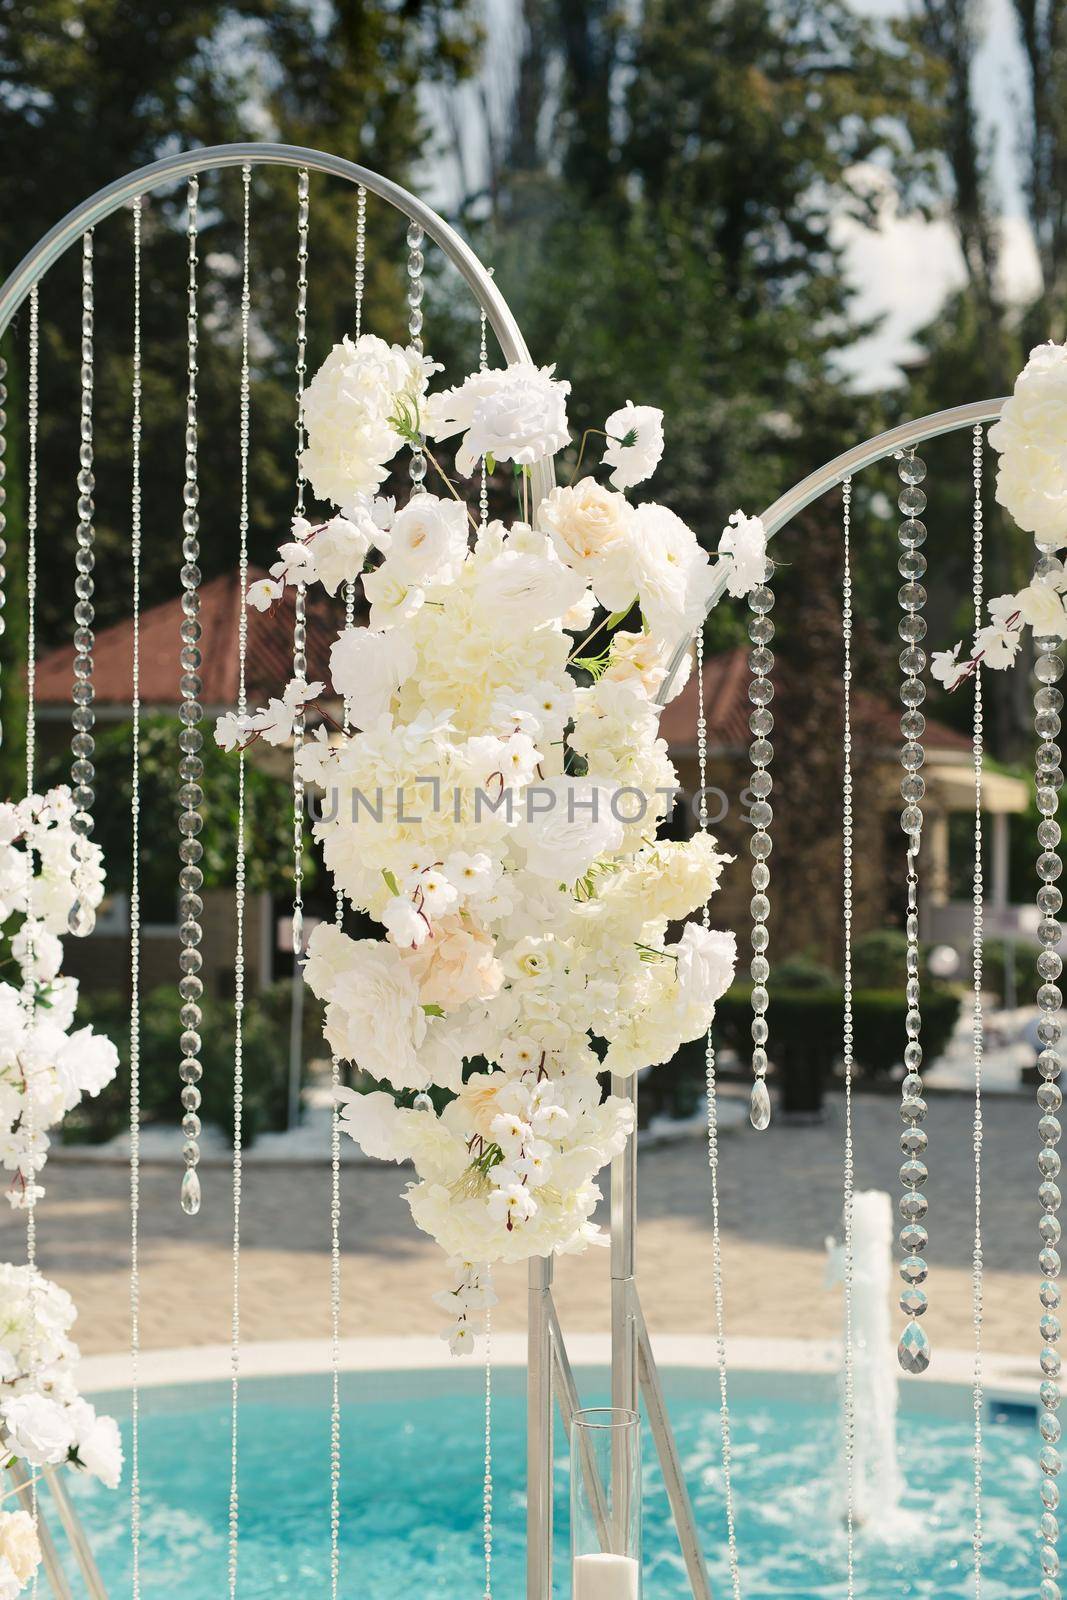 Details of the wedding ceremony made of fresh flowers, sparkling beads. Delicate and beautiful wedding decor for newlyweds by StudioPeace